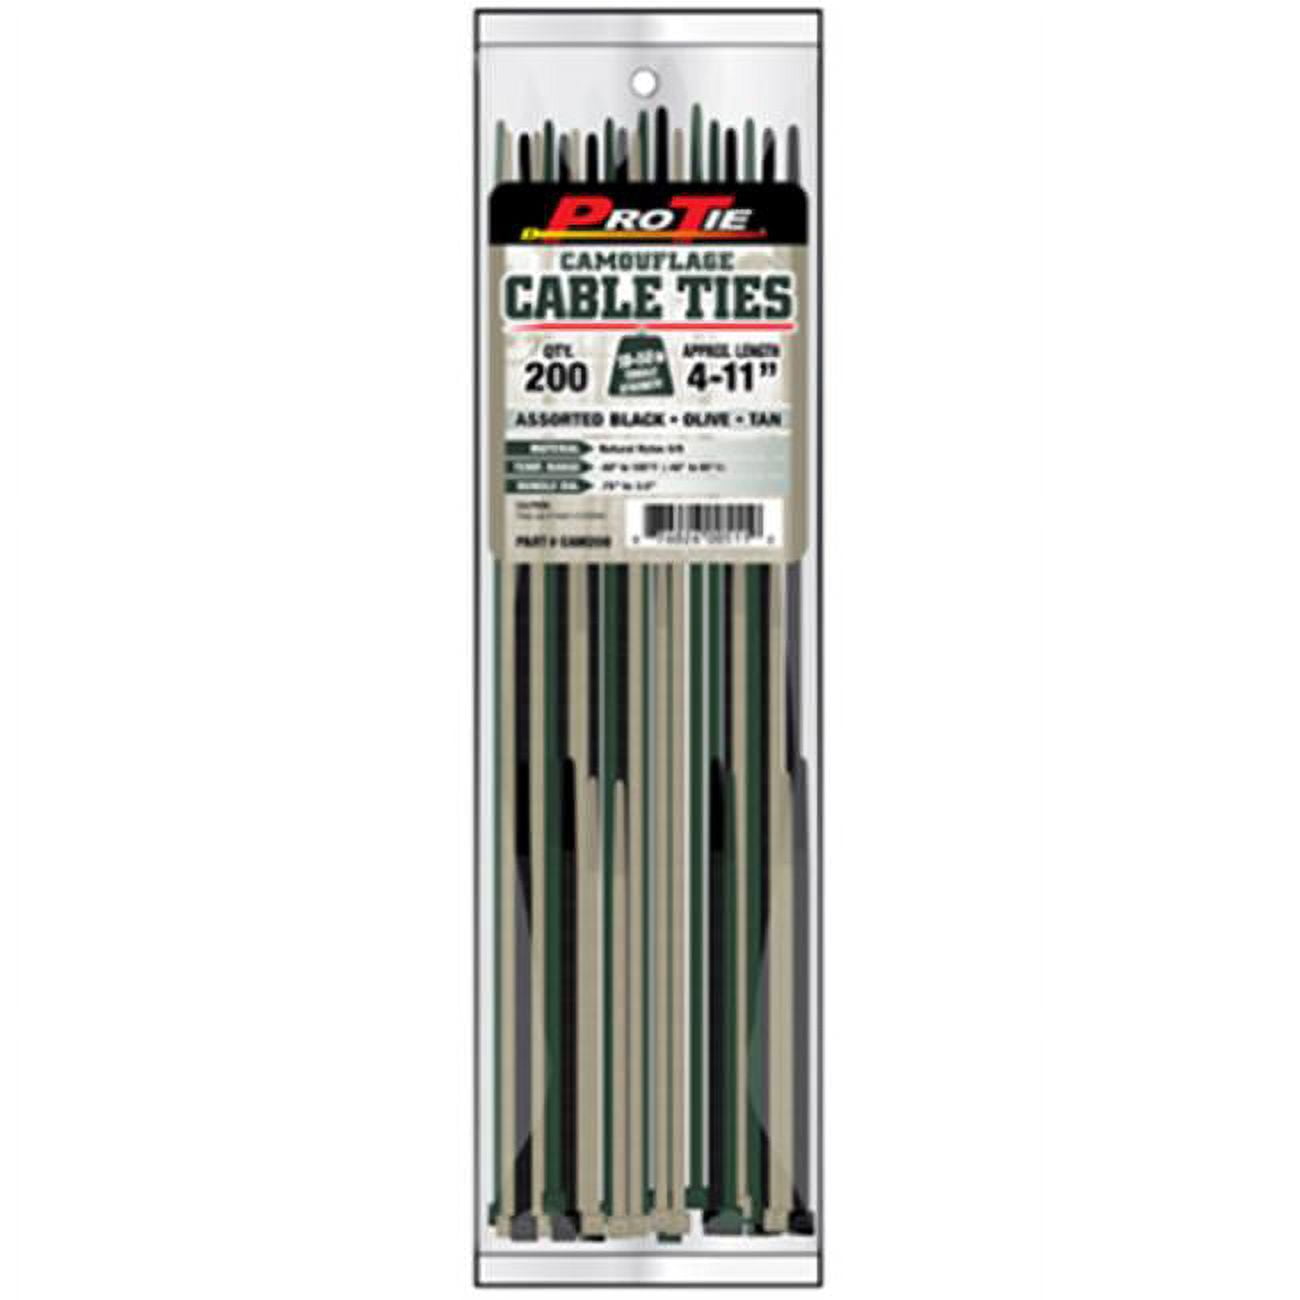 Cam200 Cable Ties, Camo Assortment - Pack Of 200